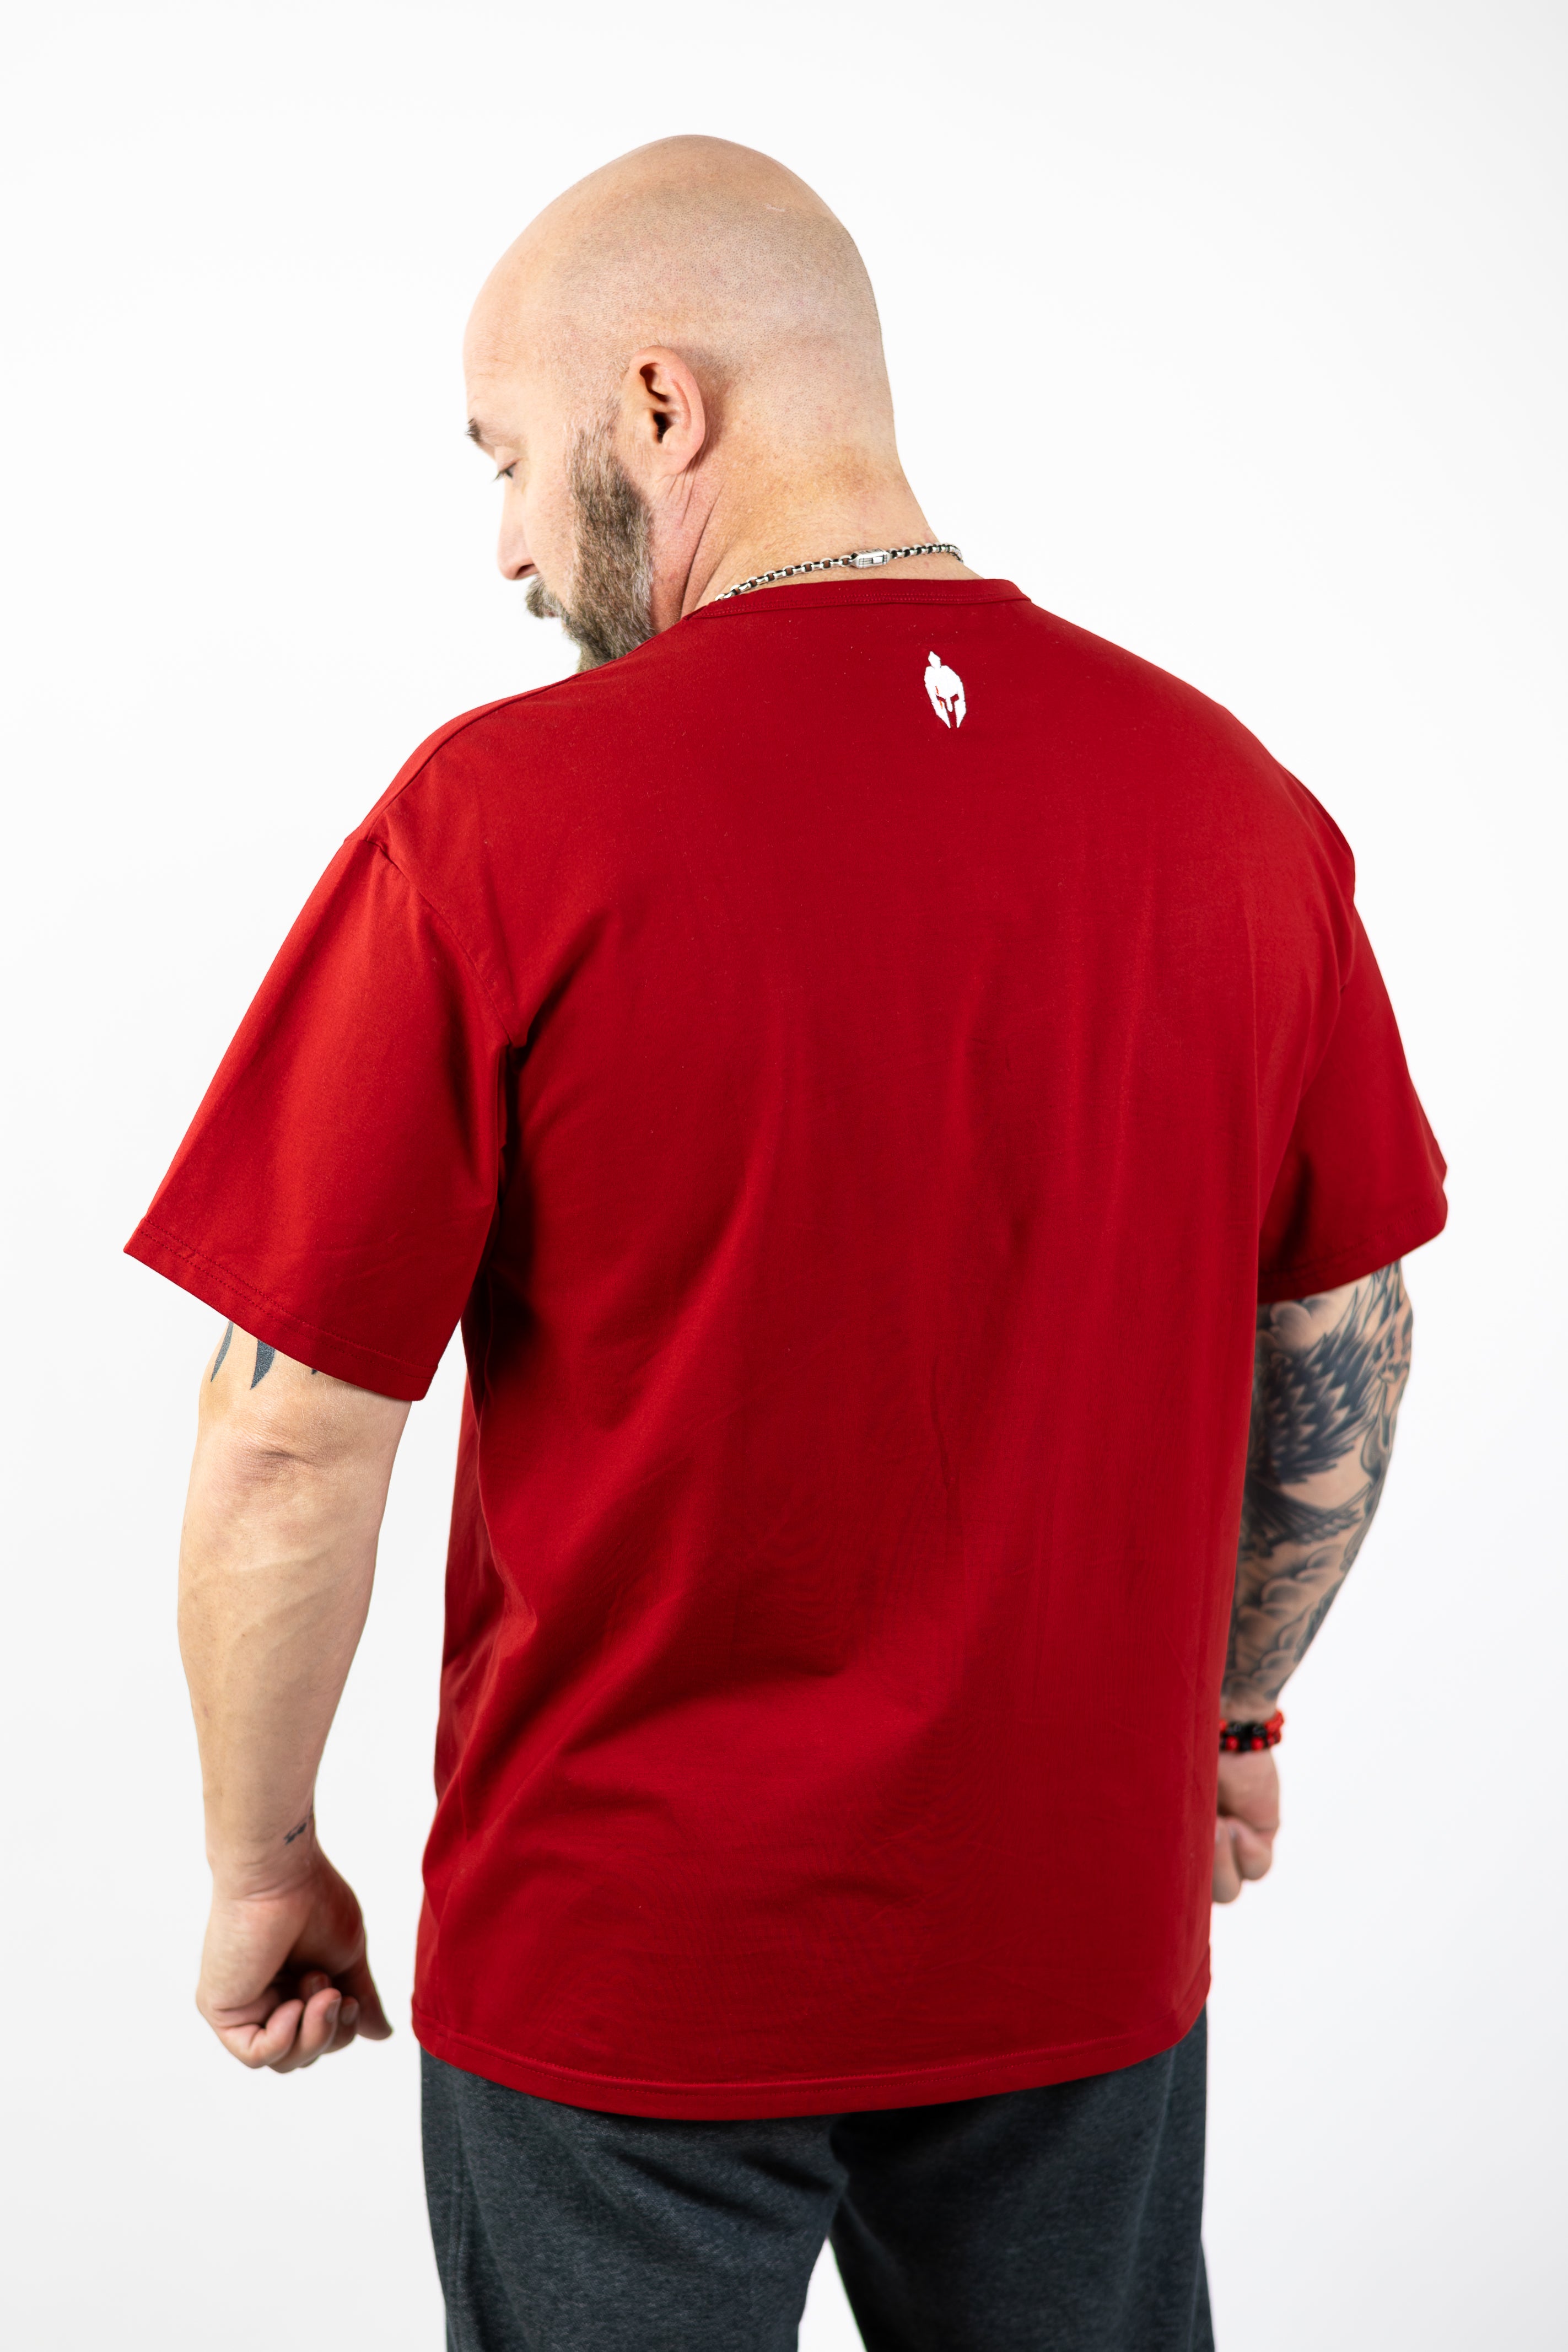 man modeling red Strength of One workout shirt with an embroidered helmet logo at the back neck